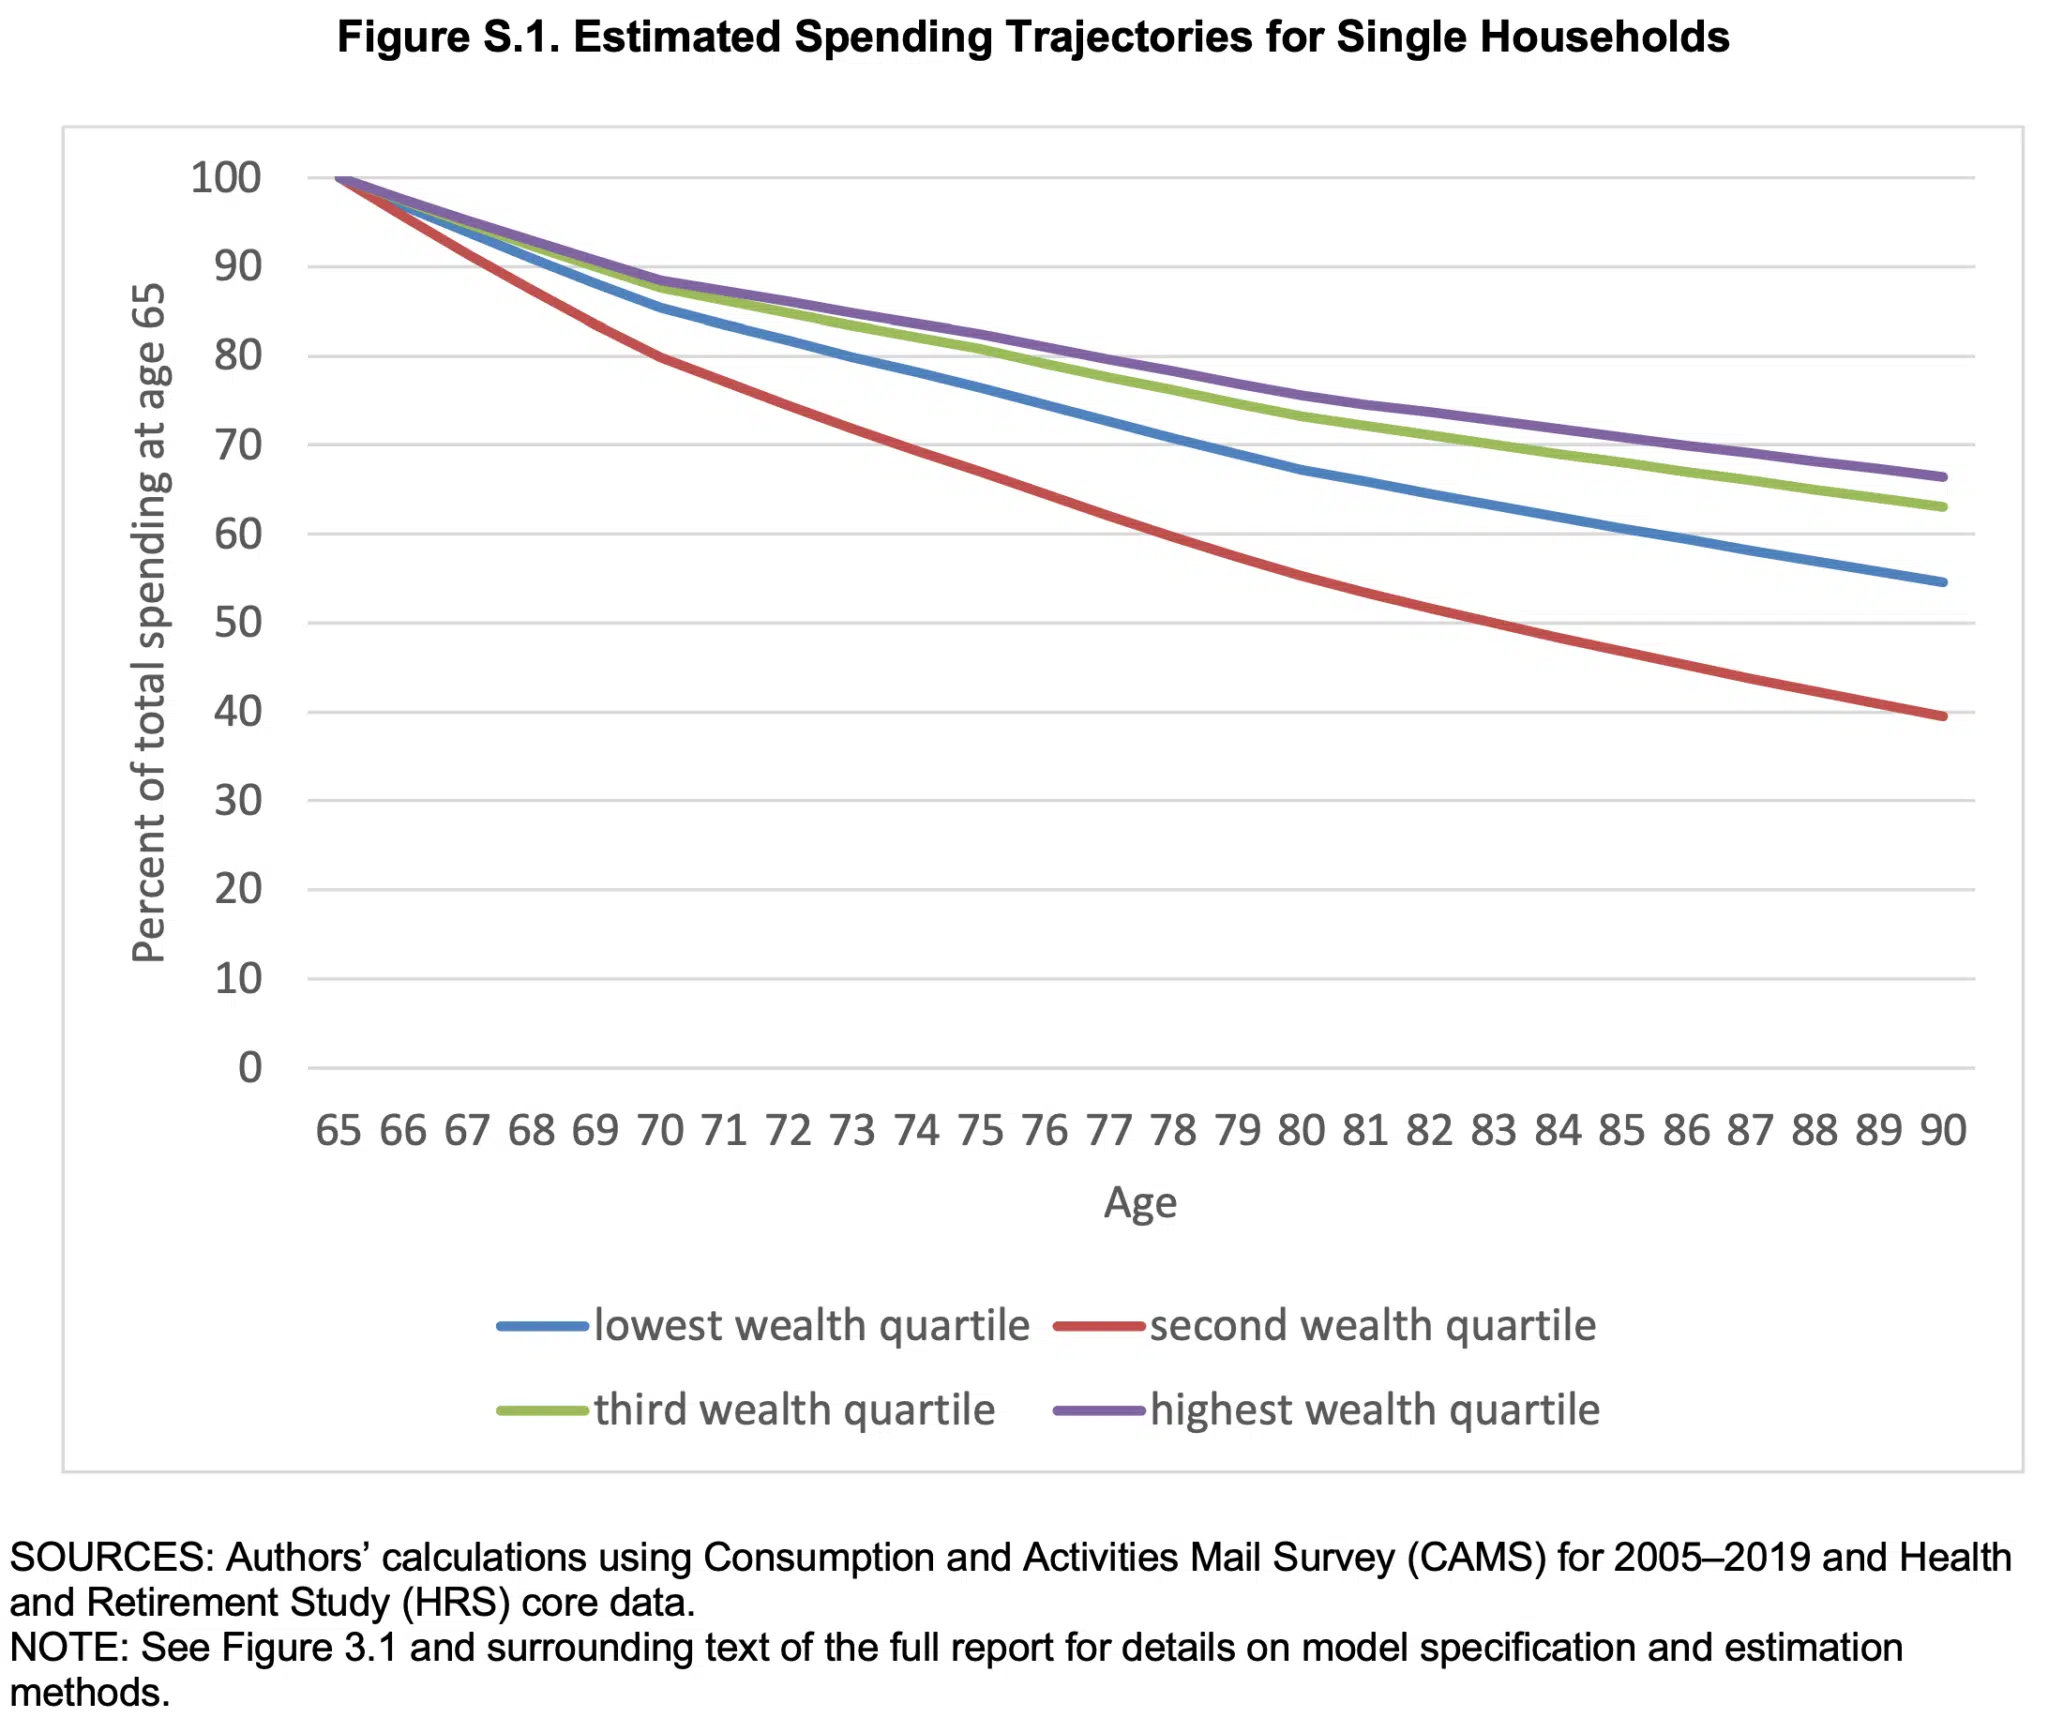 Estimated Spending Trajectories for Single Households